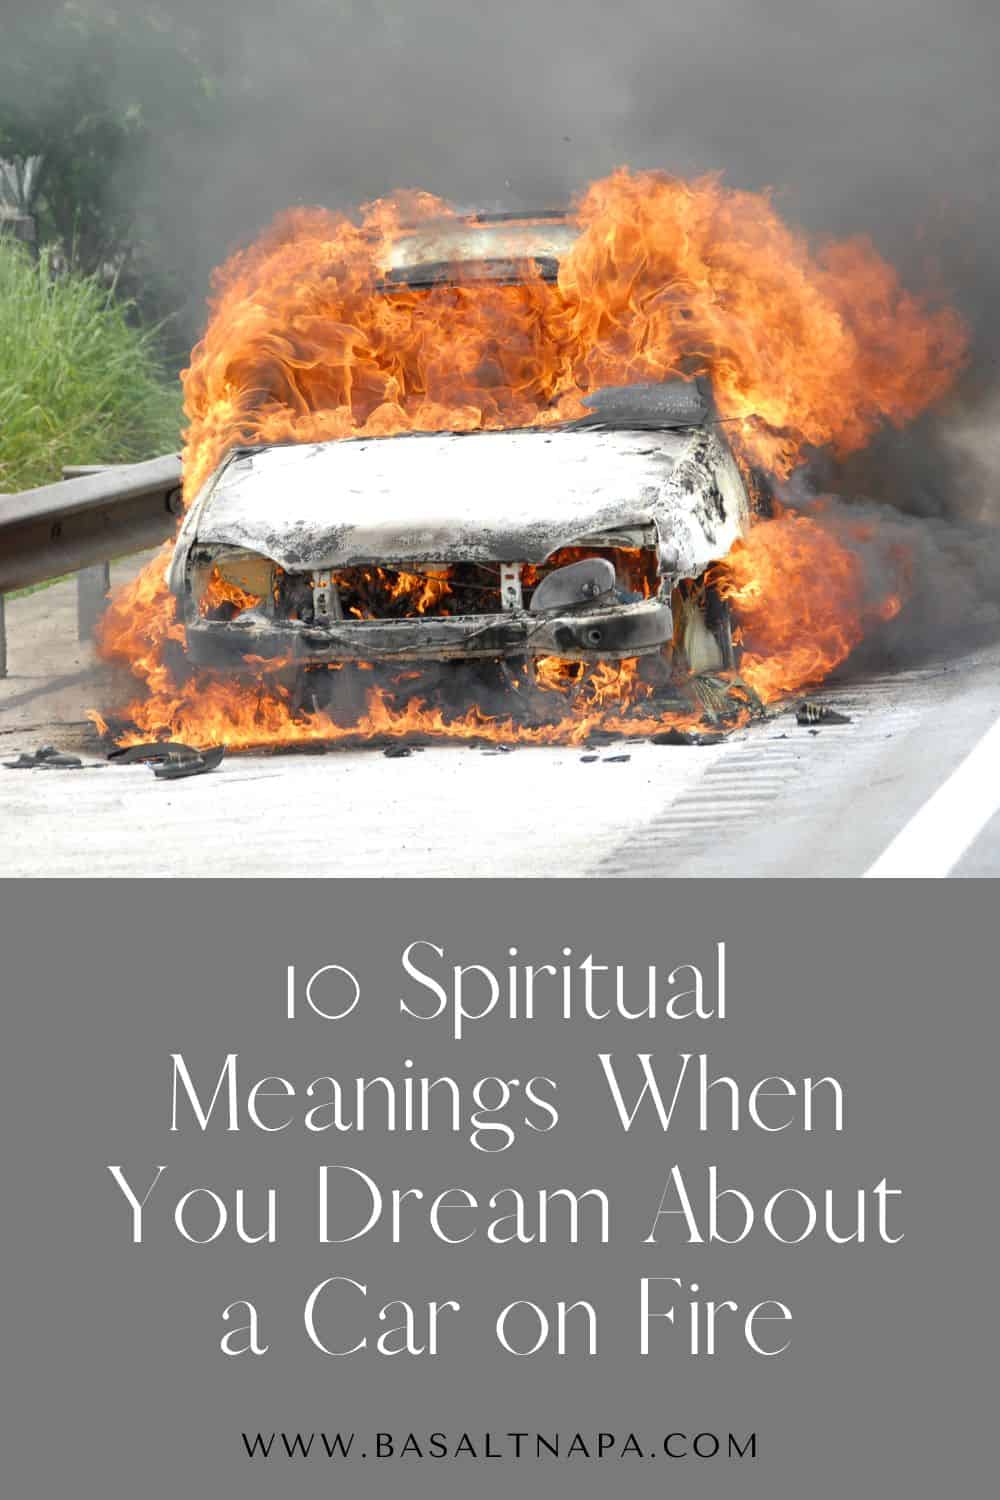 What Does it Mean When You Dream of a Car on Fire?